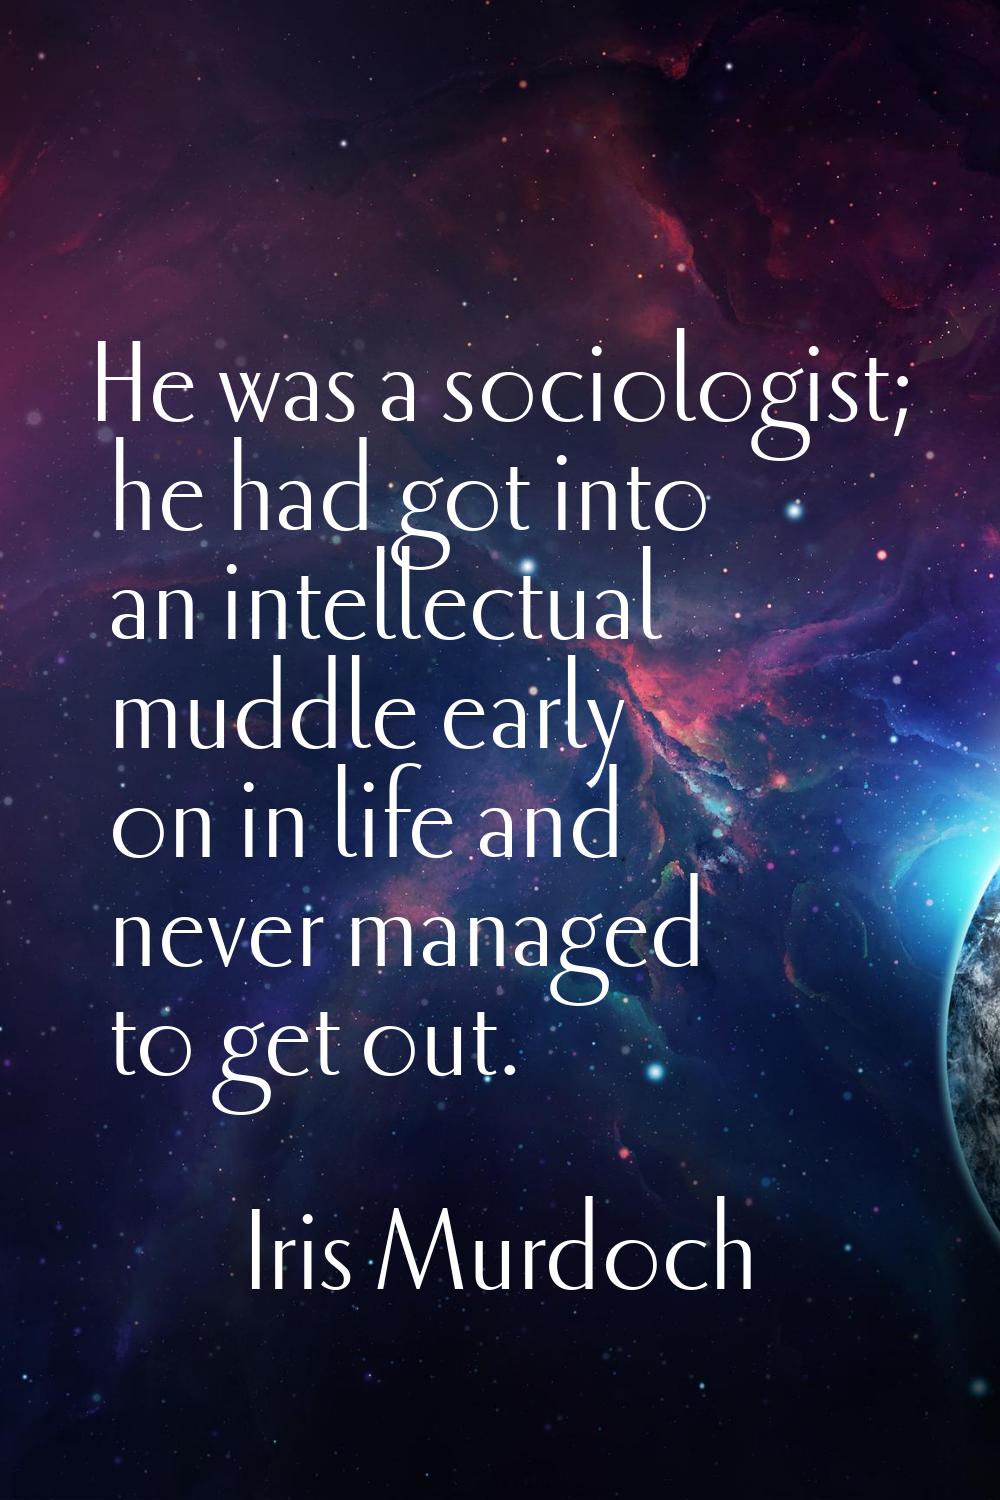 He was a sociologist; he had got into an intellectual muddle early on in life and never managed to 